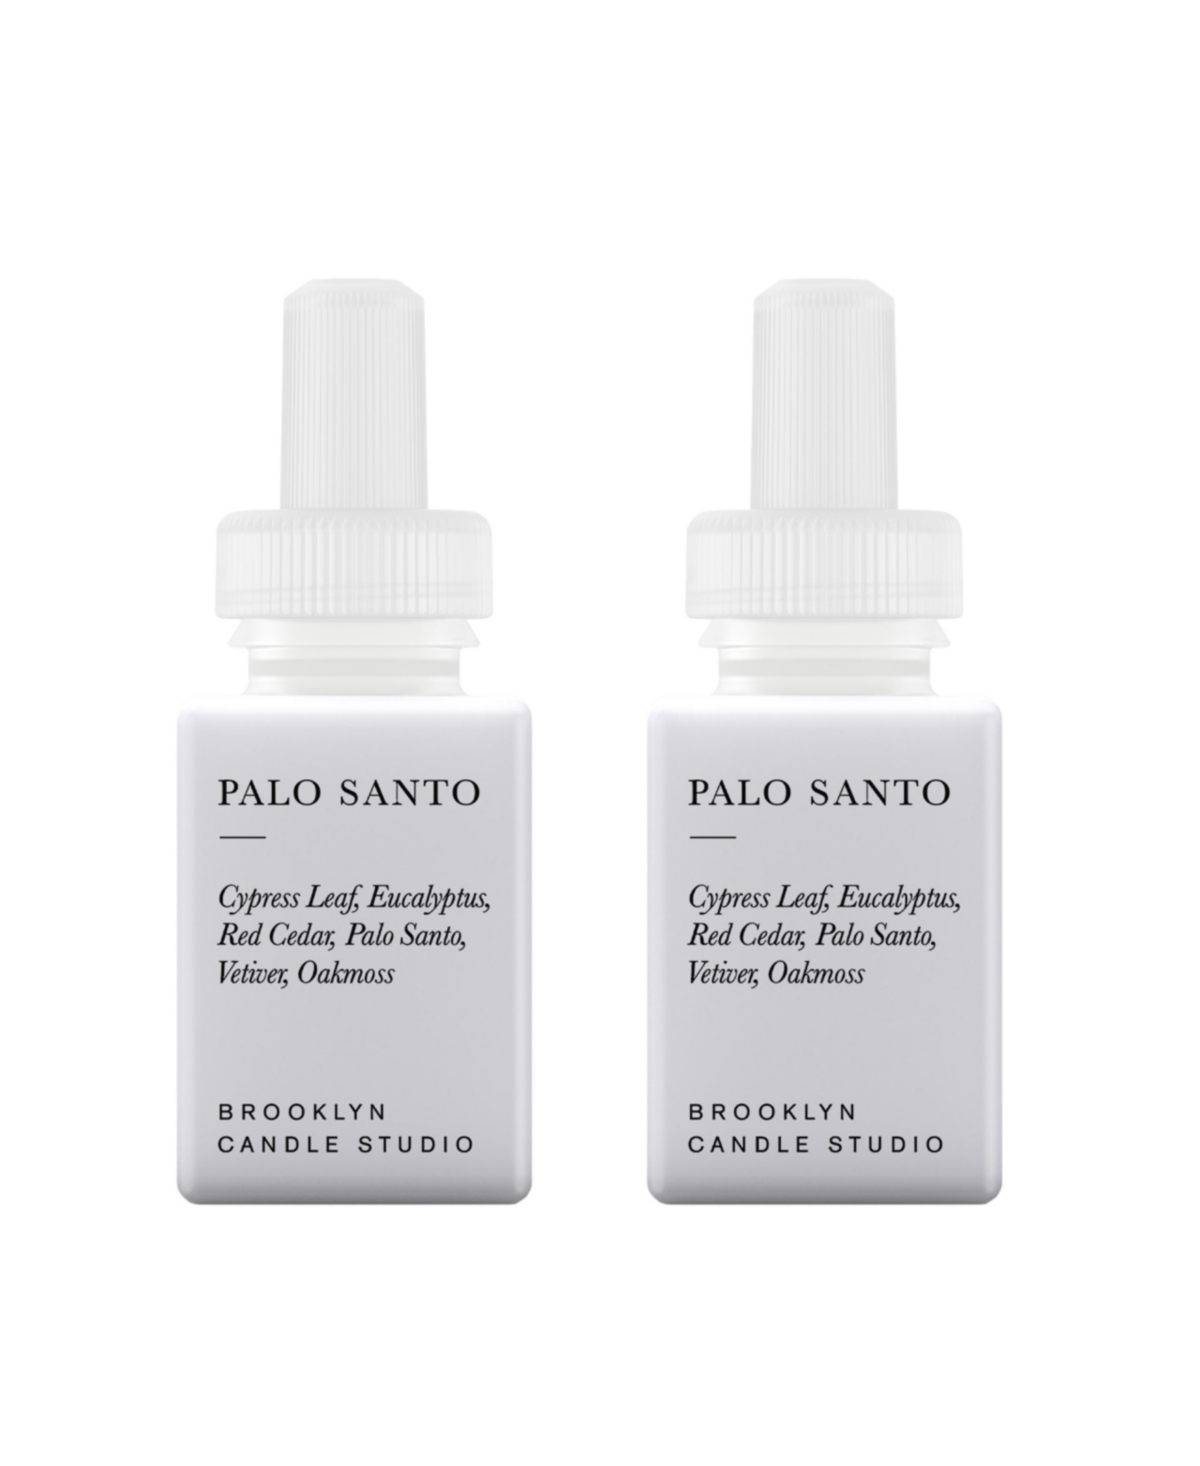 Brooklyn Candle Studio - Palo Santo - Home Scent Refill - Smart Home Air Diffuser Fragrance - Up to 120-Hours of Luxury Fragrance per Vial - Clea